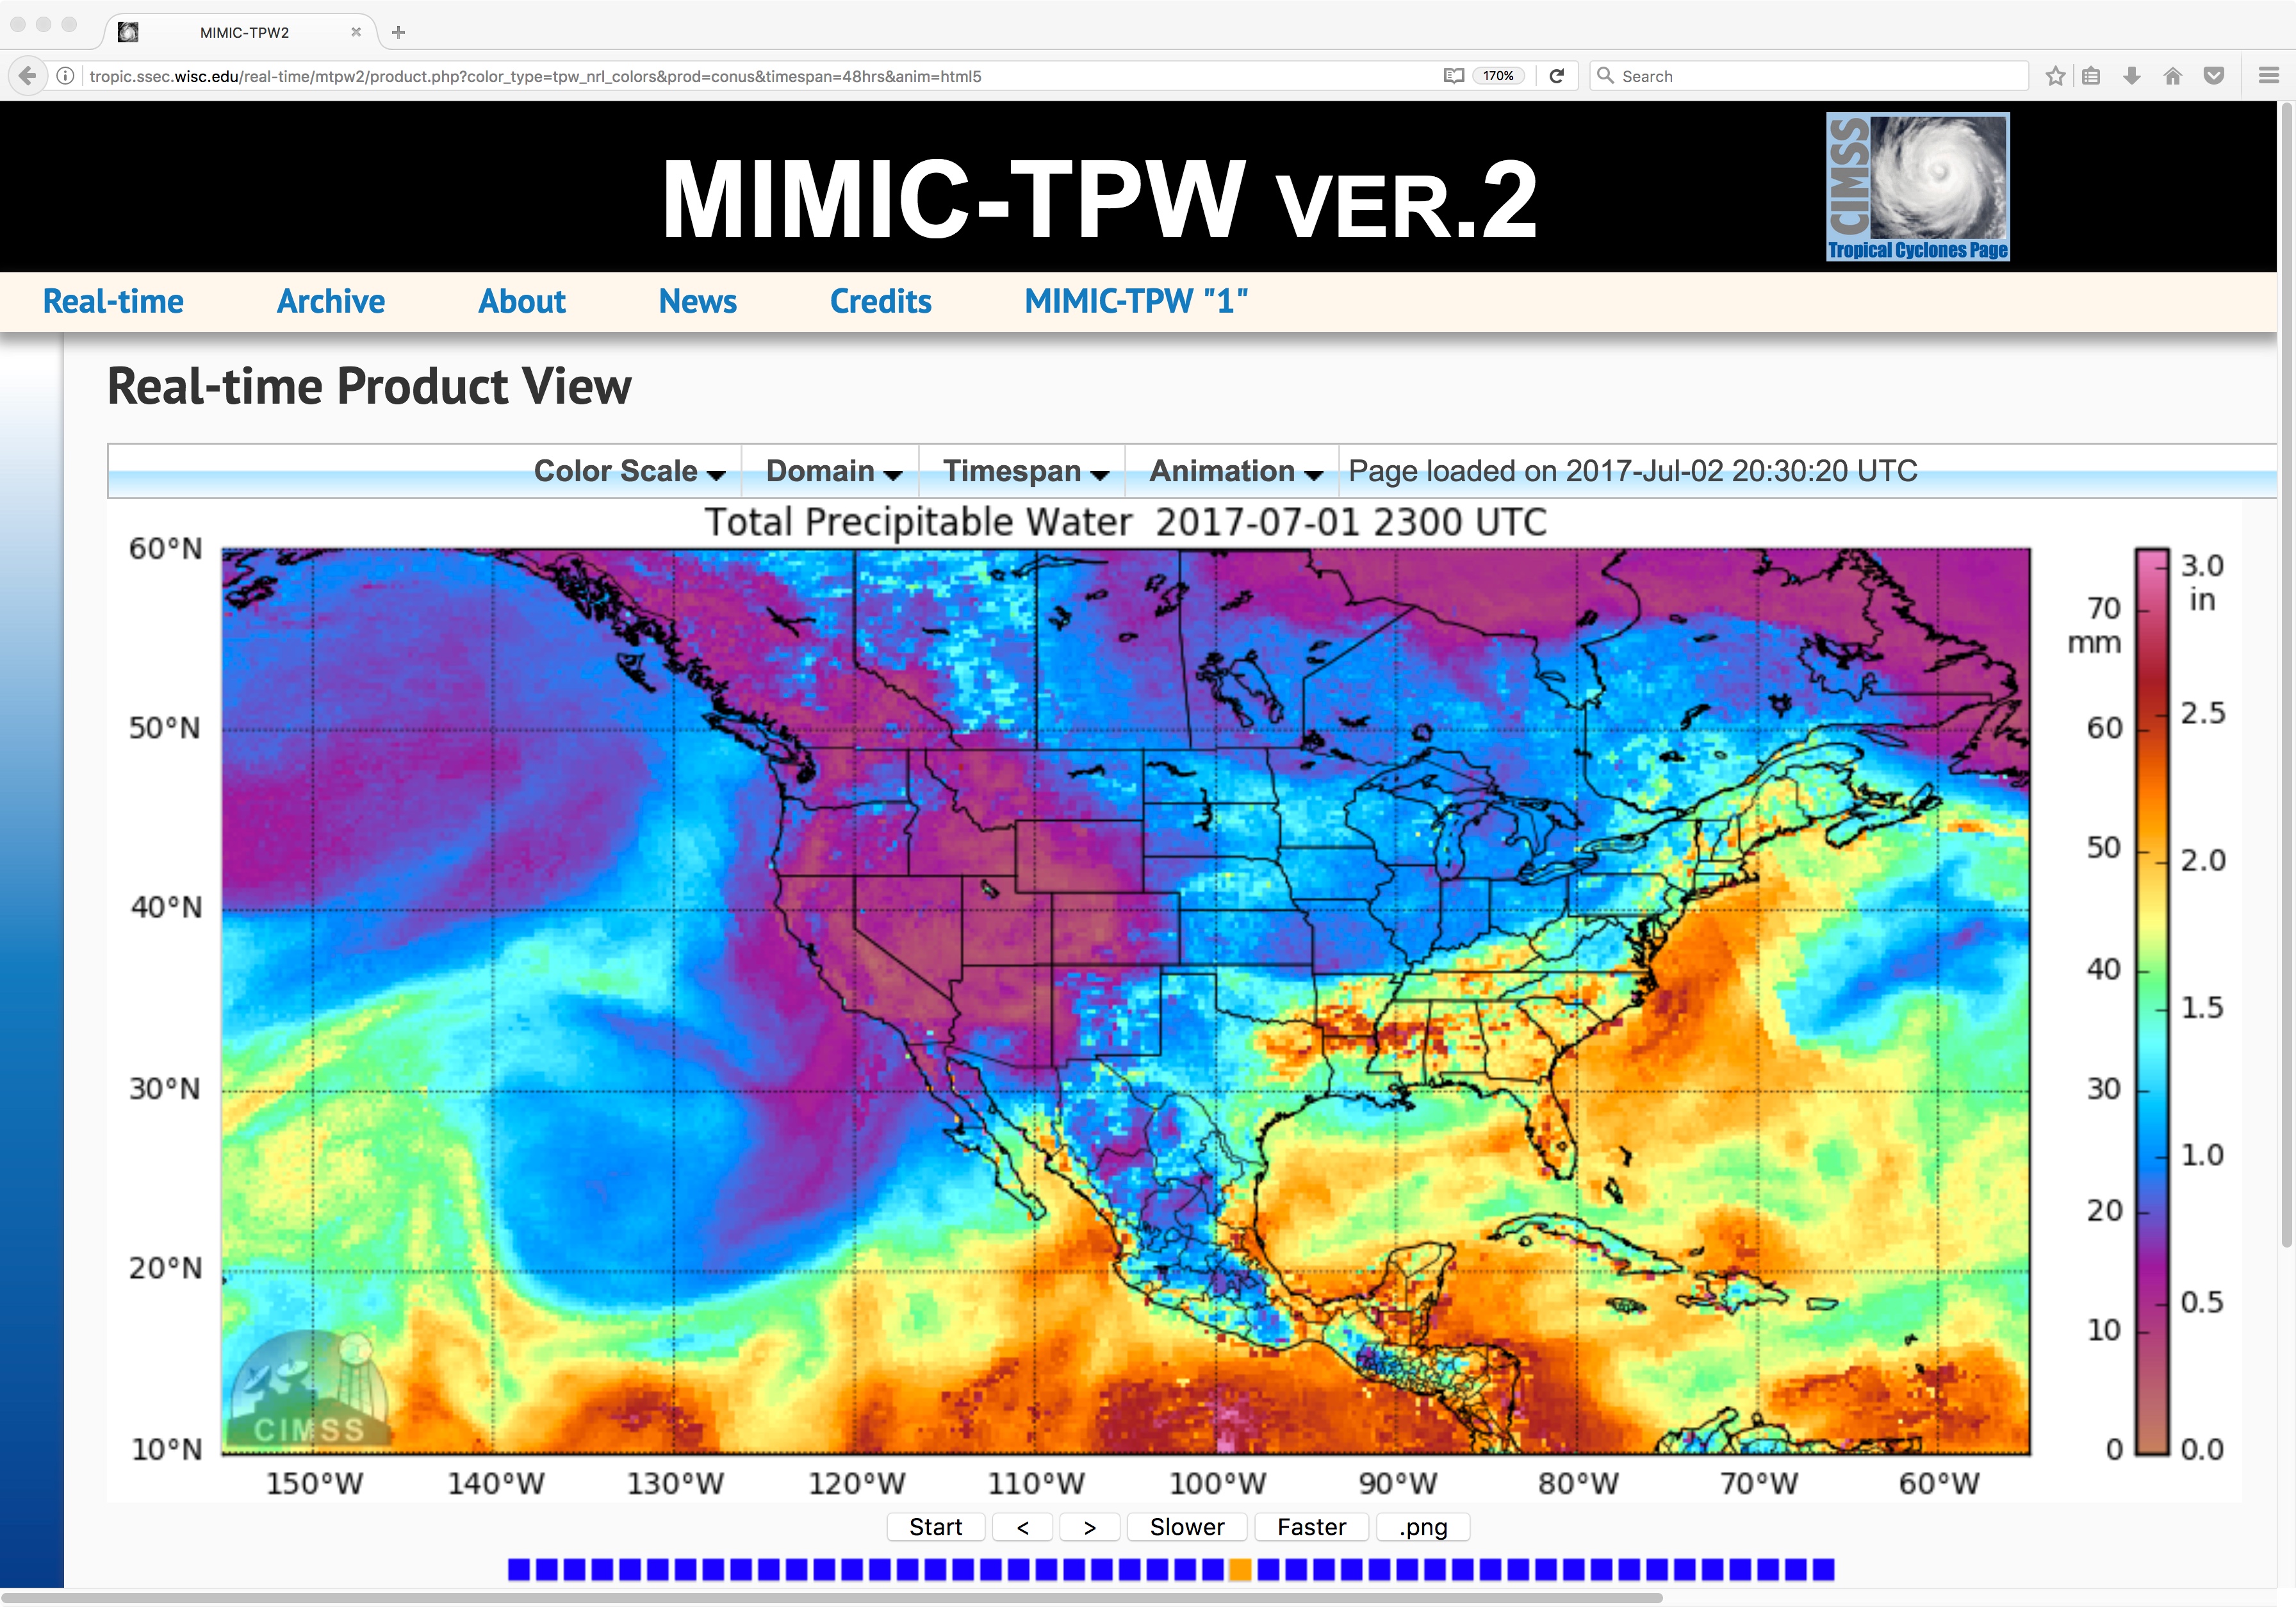 MIMIC Total Precipitable Water product [click to play animation]